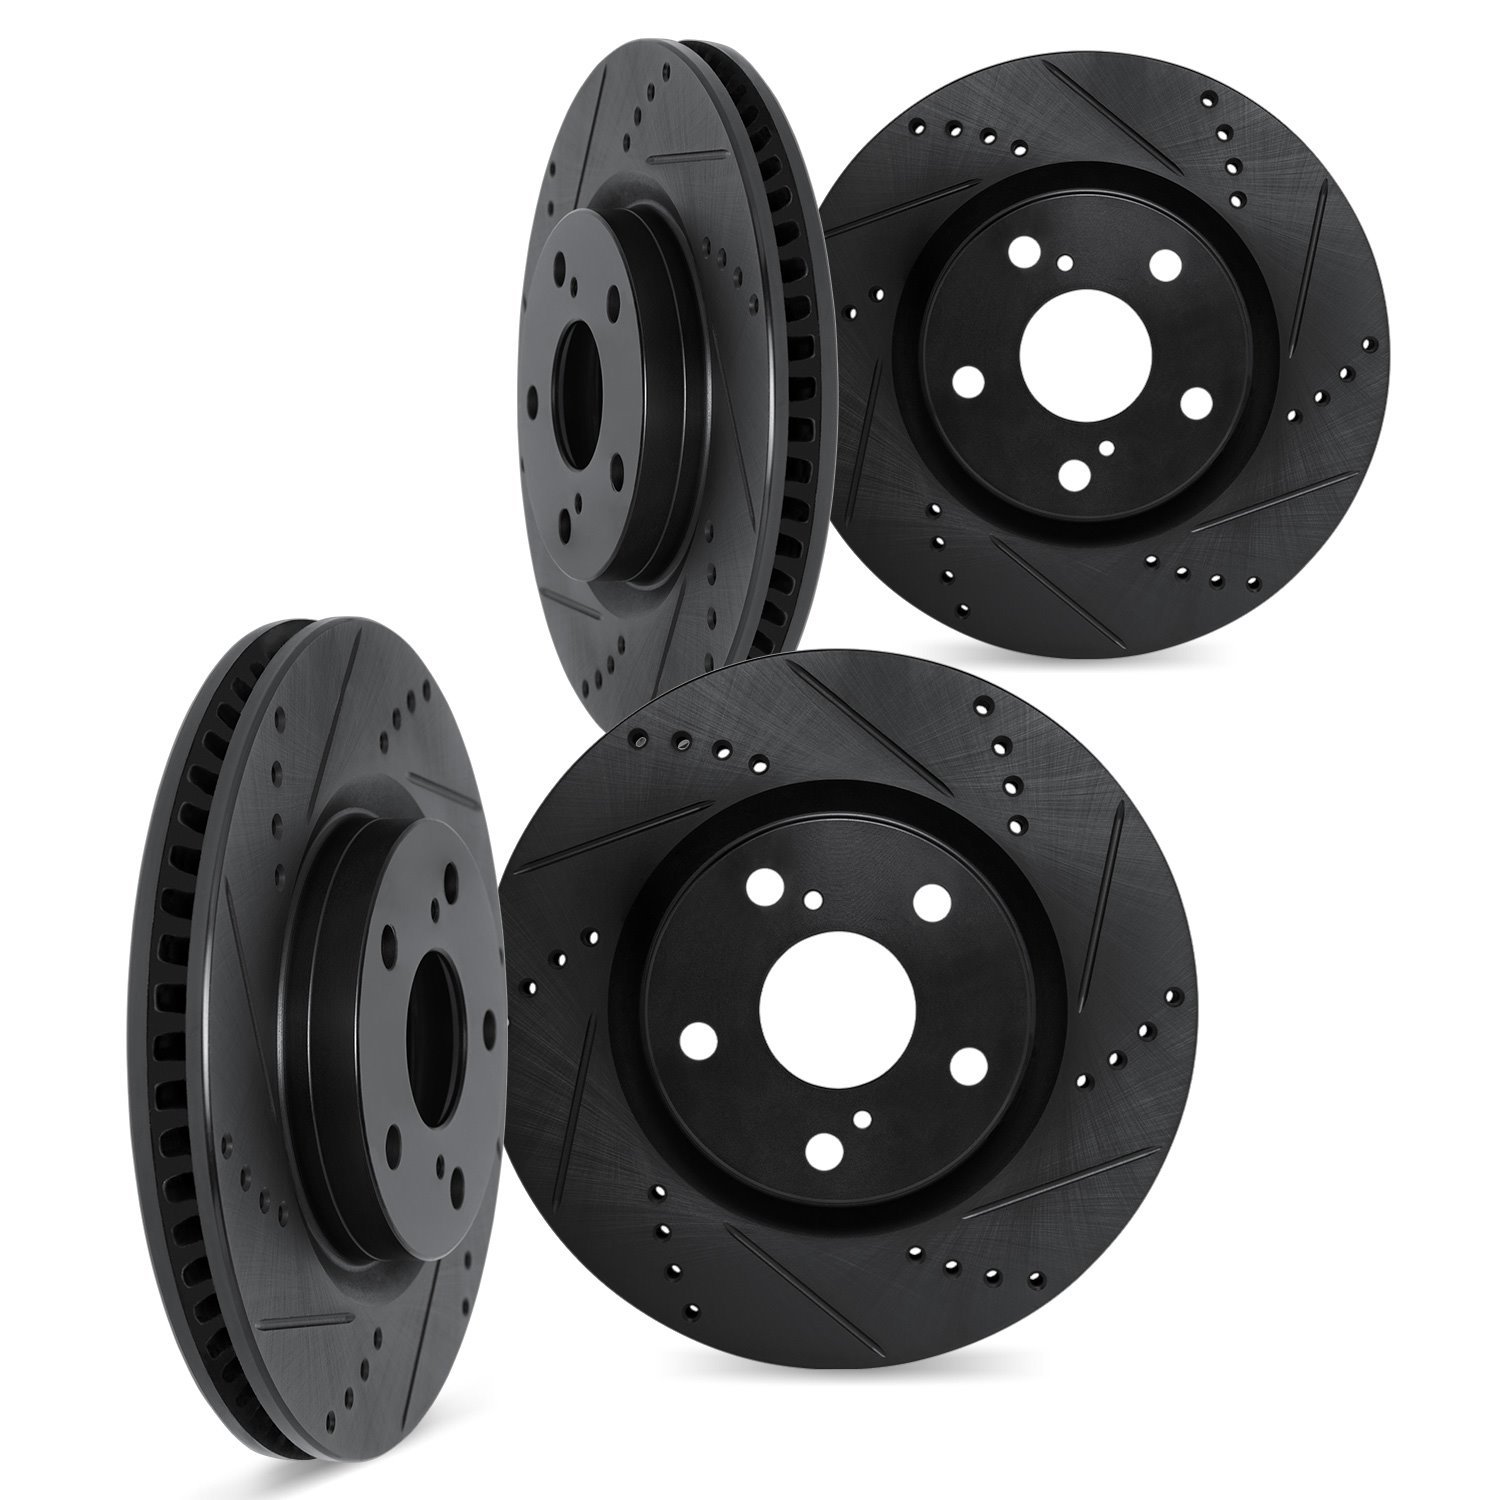 8004-73064 Drilled/Slotted Brake Rotors [Black], 2001-2003 Audi/Volkswagen, Position: Front and Rear